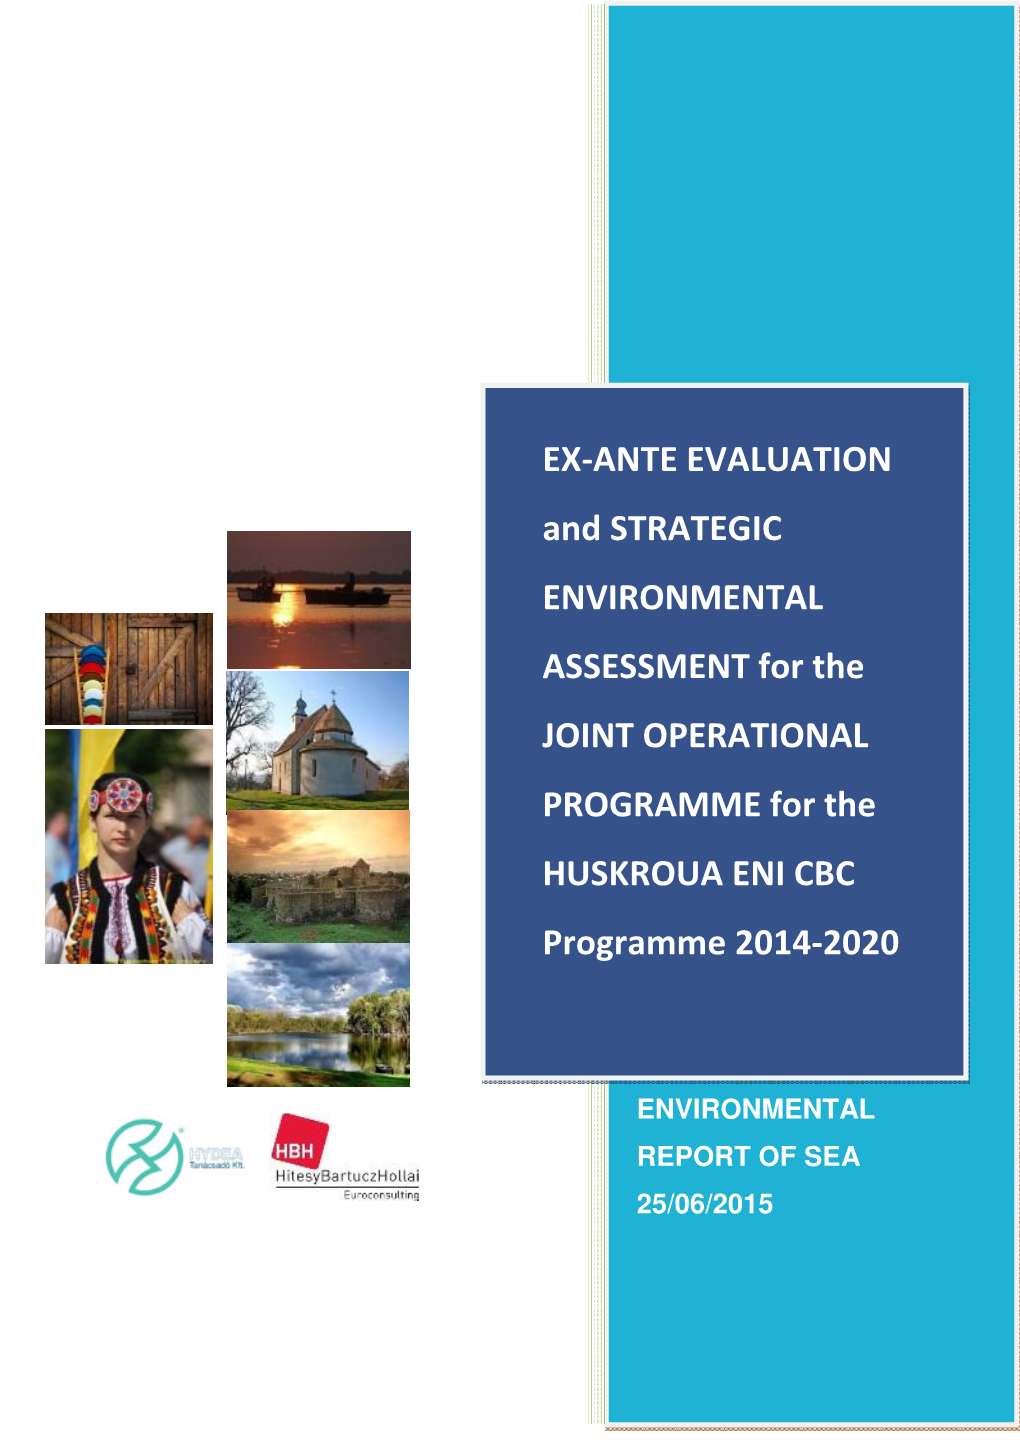 EX-ANTE EVALUATION and STRATEGIC ENVIRONMENTAL ASSESSMENT for the JOINT OPERATIONAL PROGRAMME for the HUSKROUA ENI CBC Programme